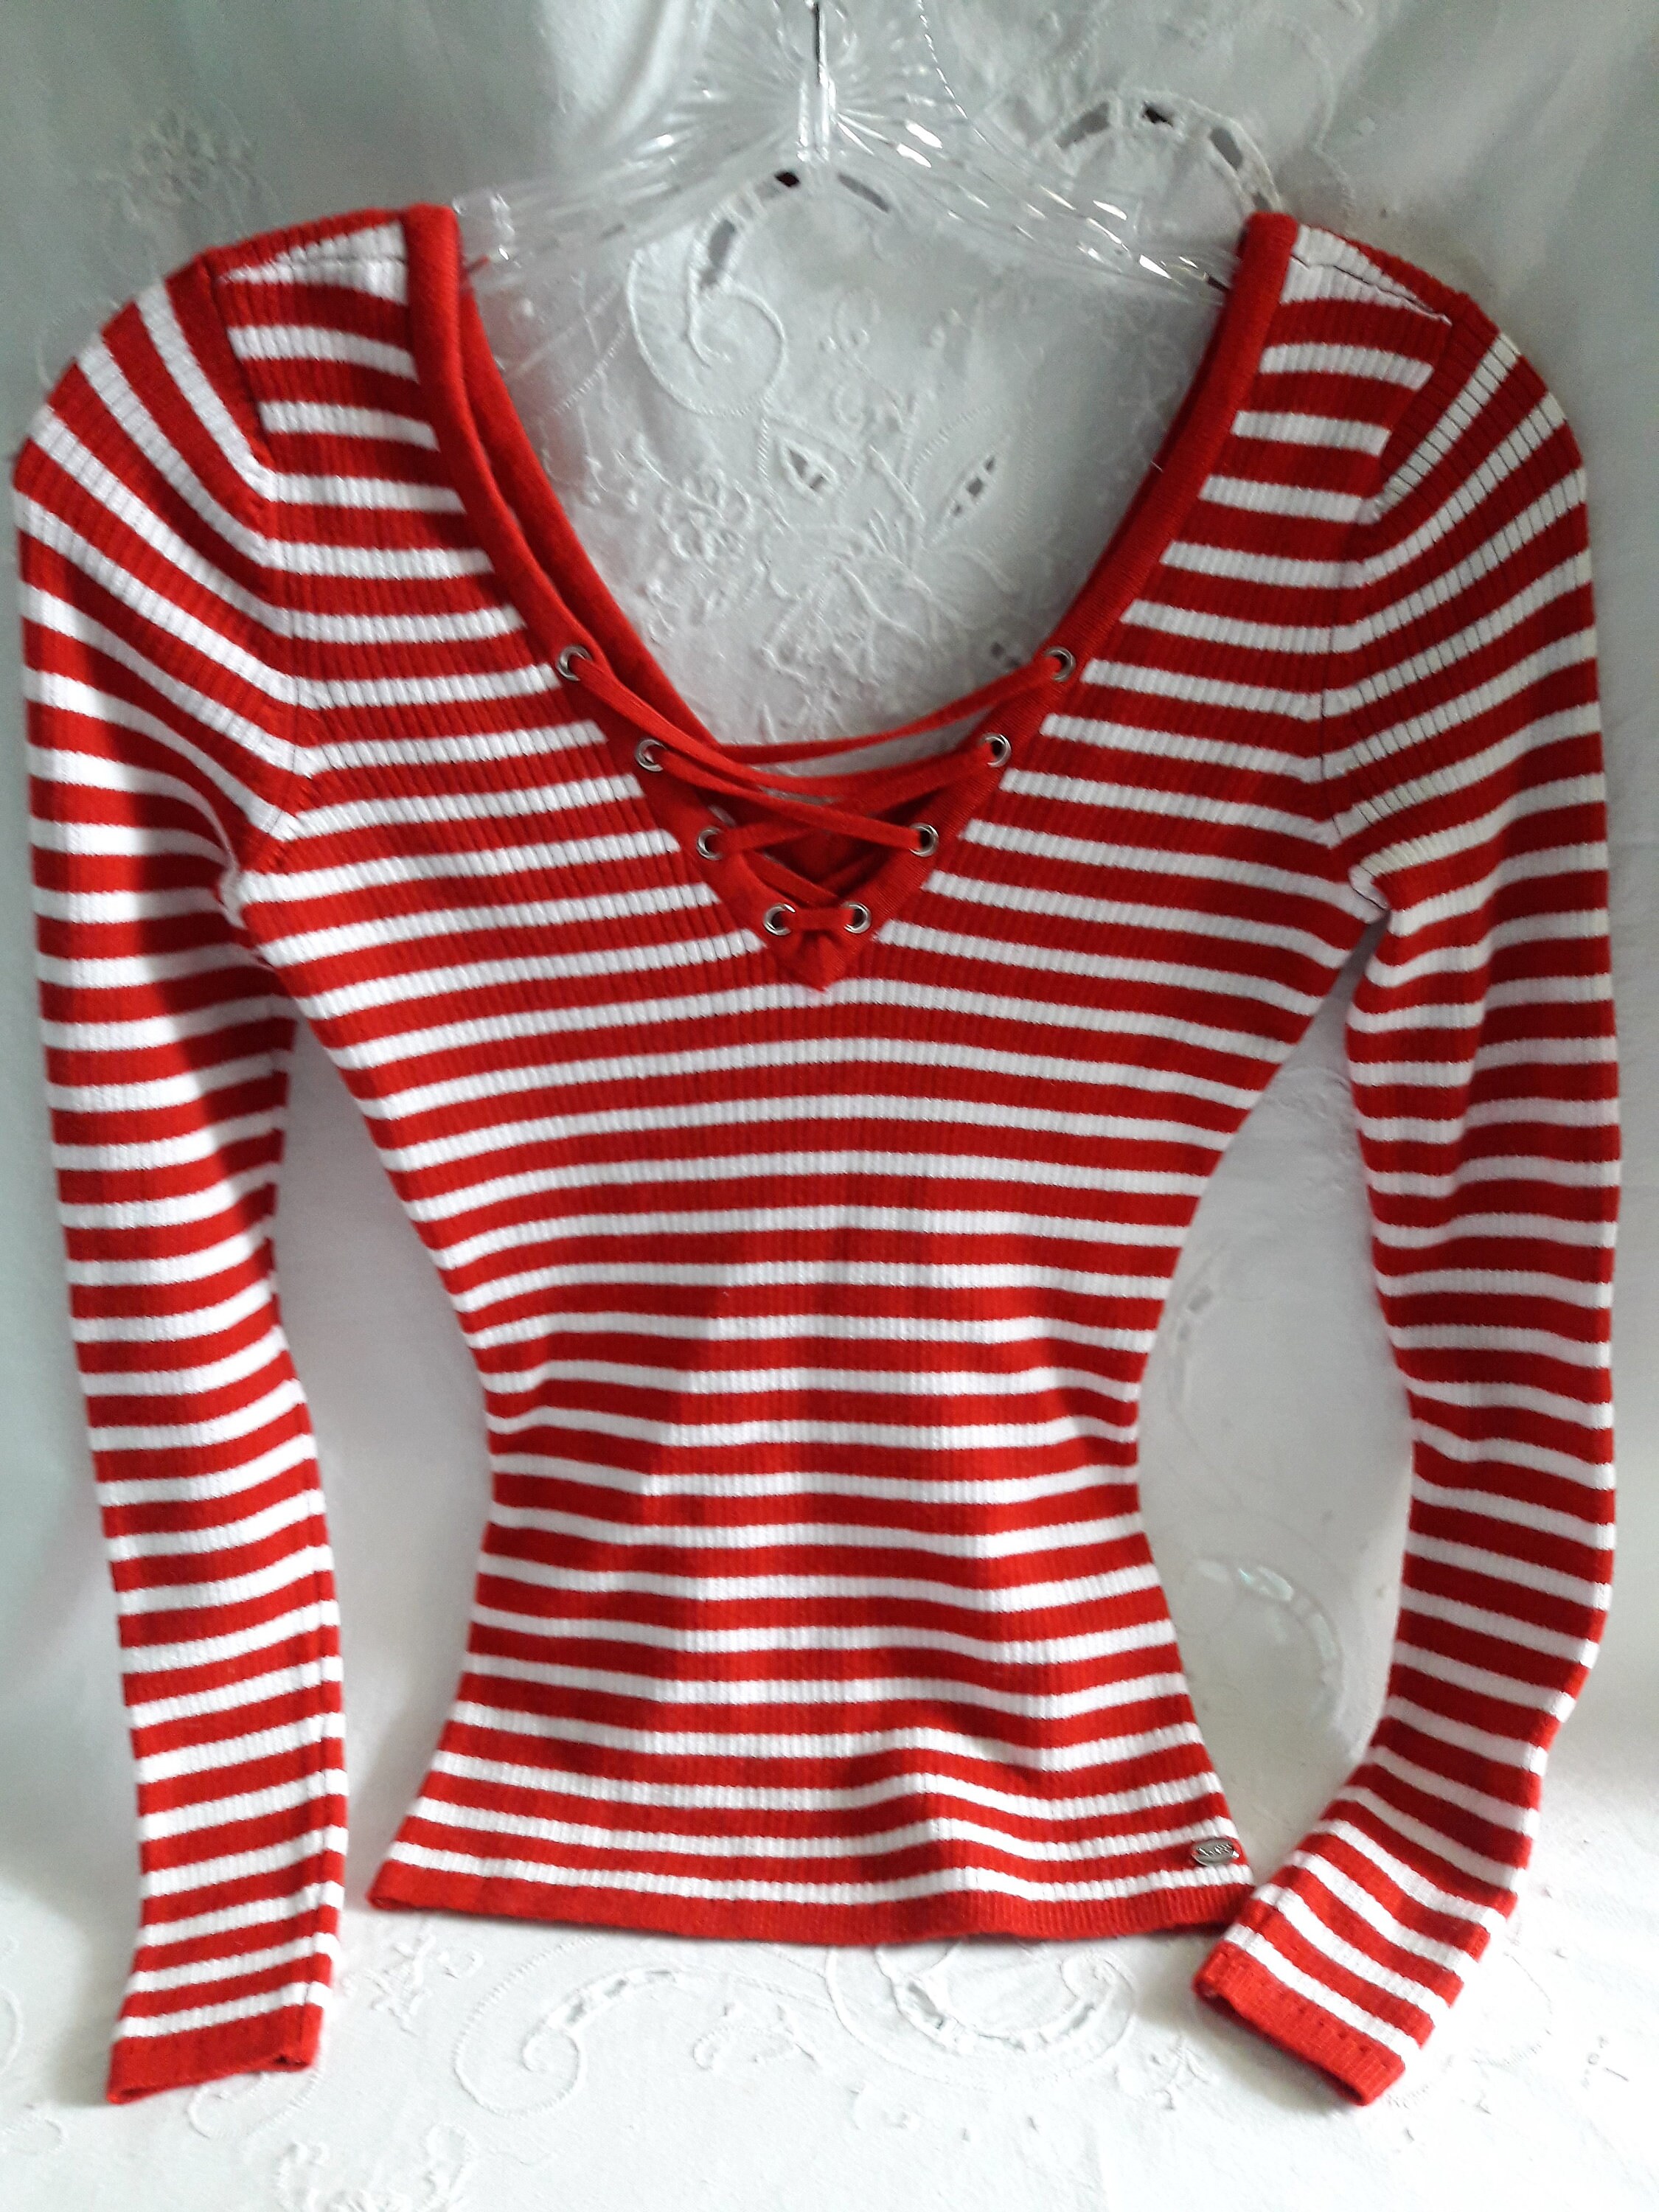 GUESS Long Sleeve Striped Lace Top, $69, GUESS